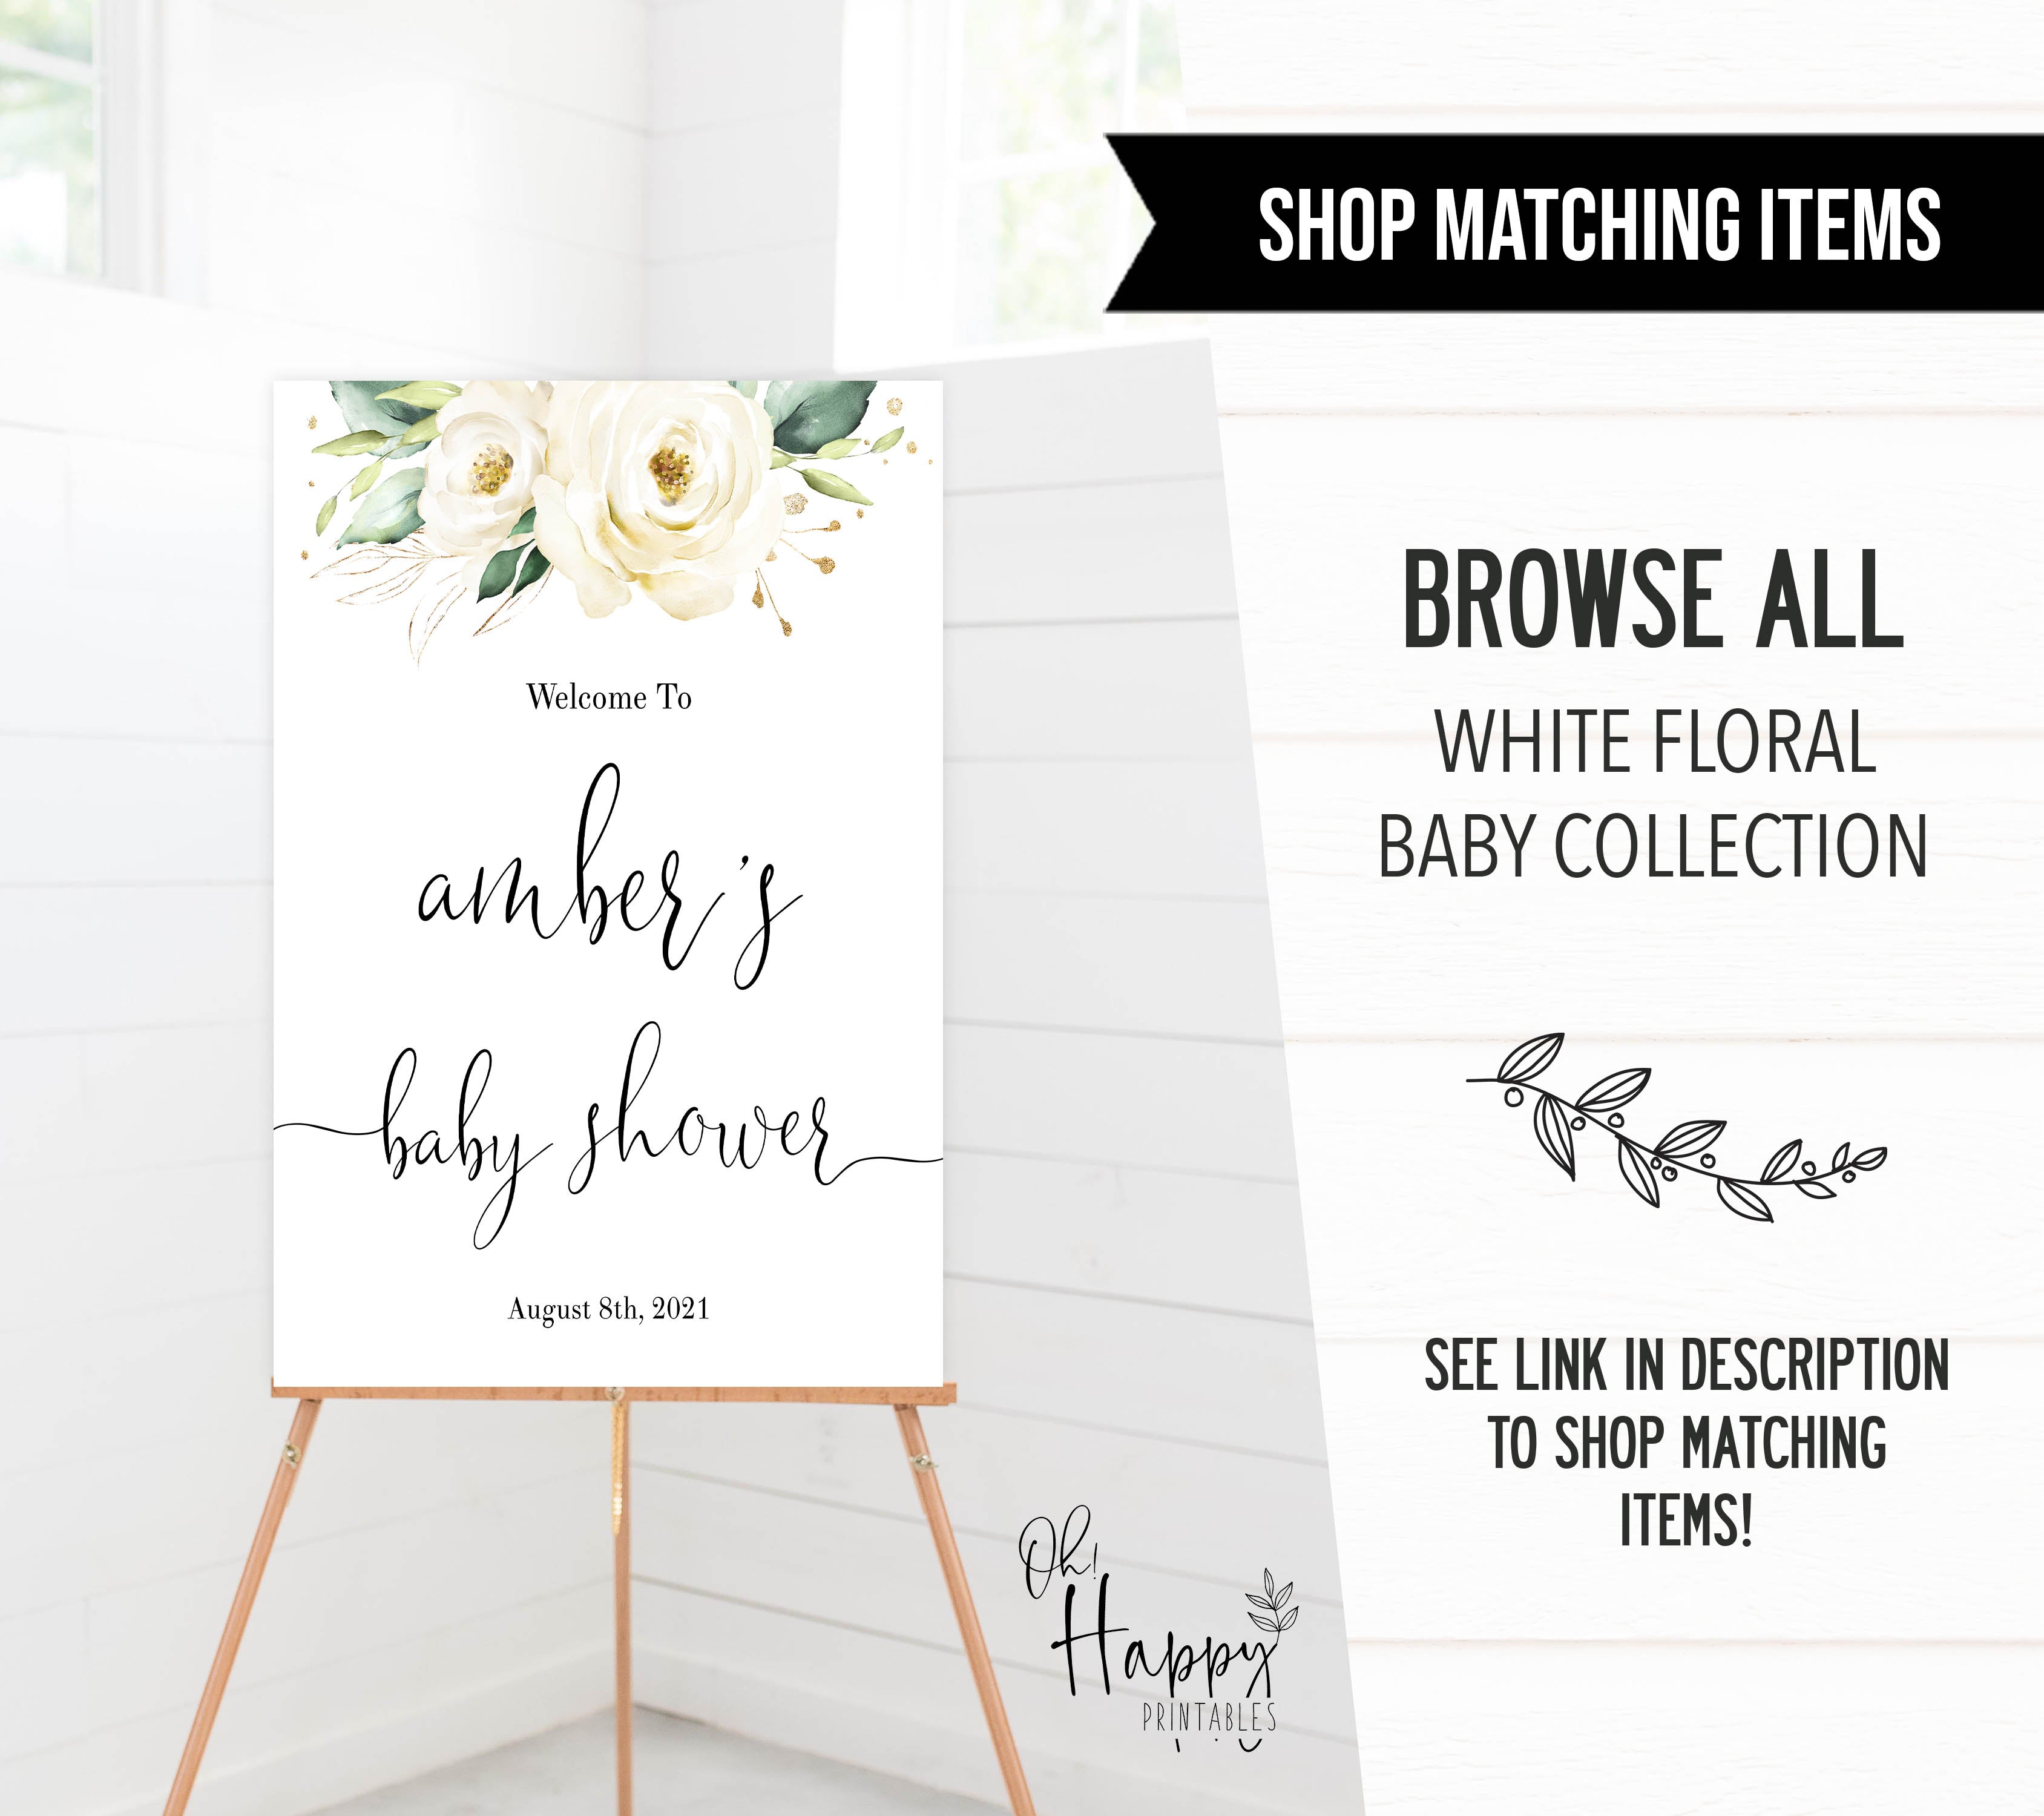 how big is mommys belly baby game, Printable baby shower games, shite floral baby games, baby shower games, fun baby shower ideas, top baby shower ideas, floral baby shower, baby shower games, fun floral baby shower ideas